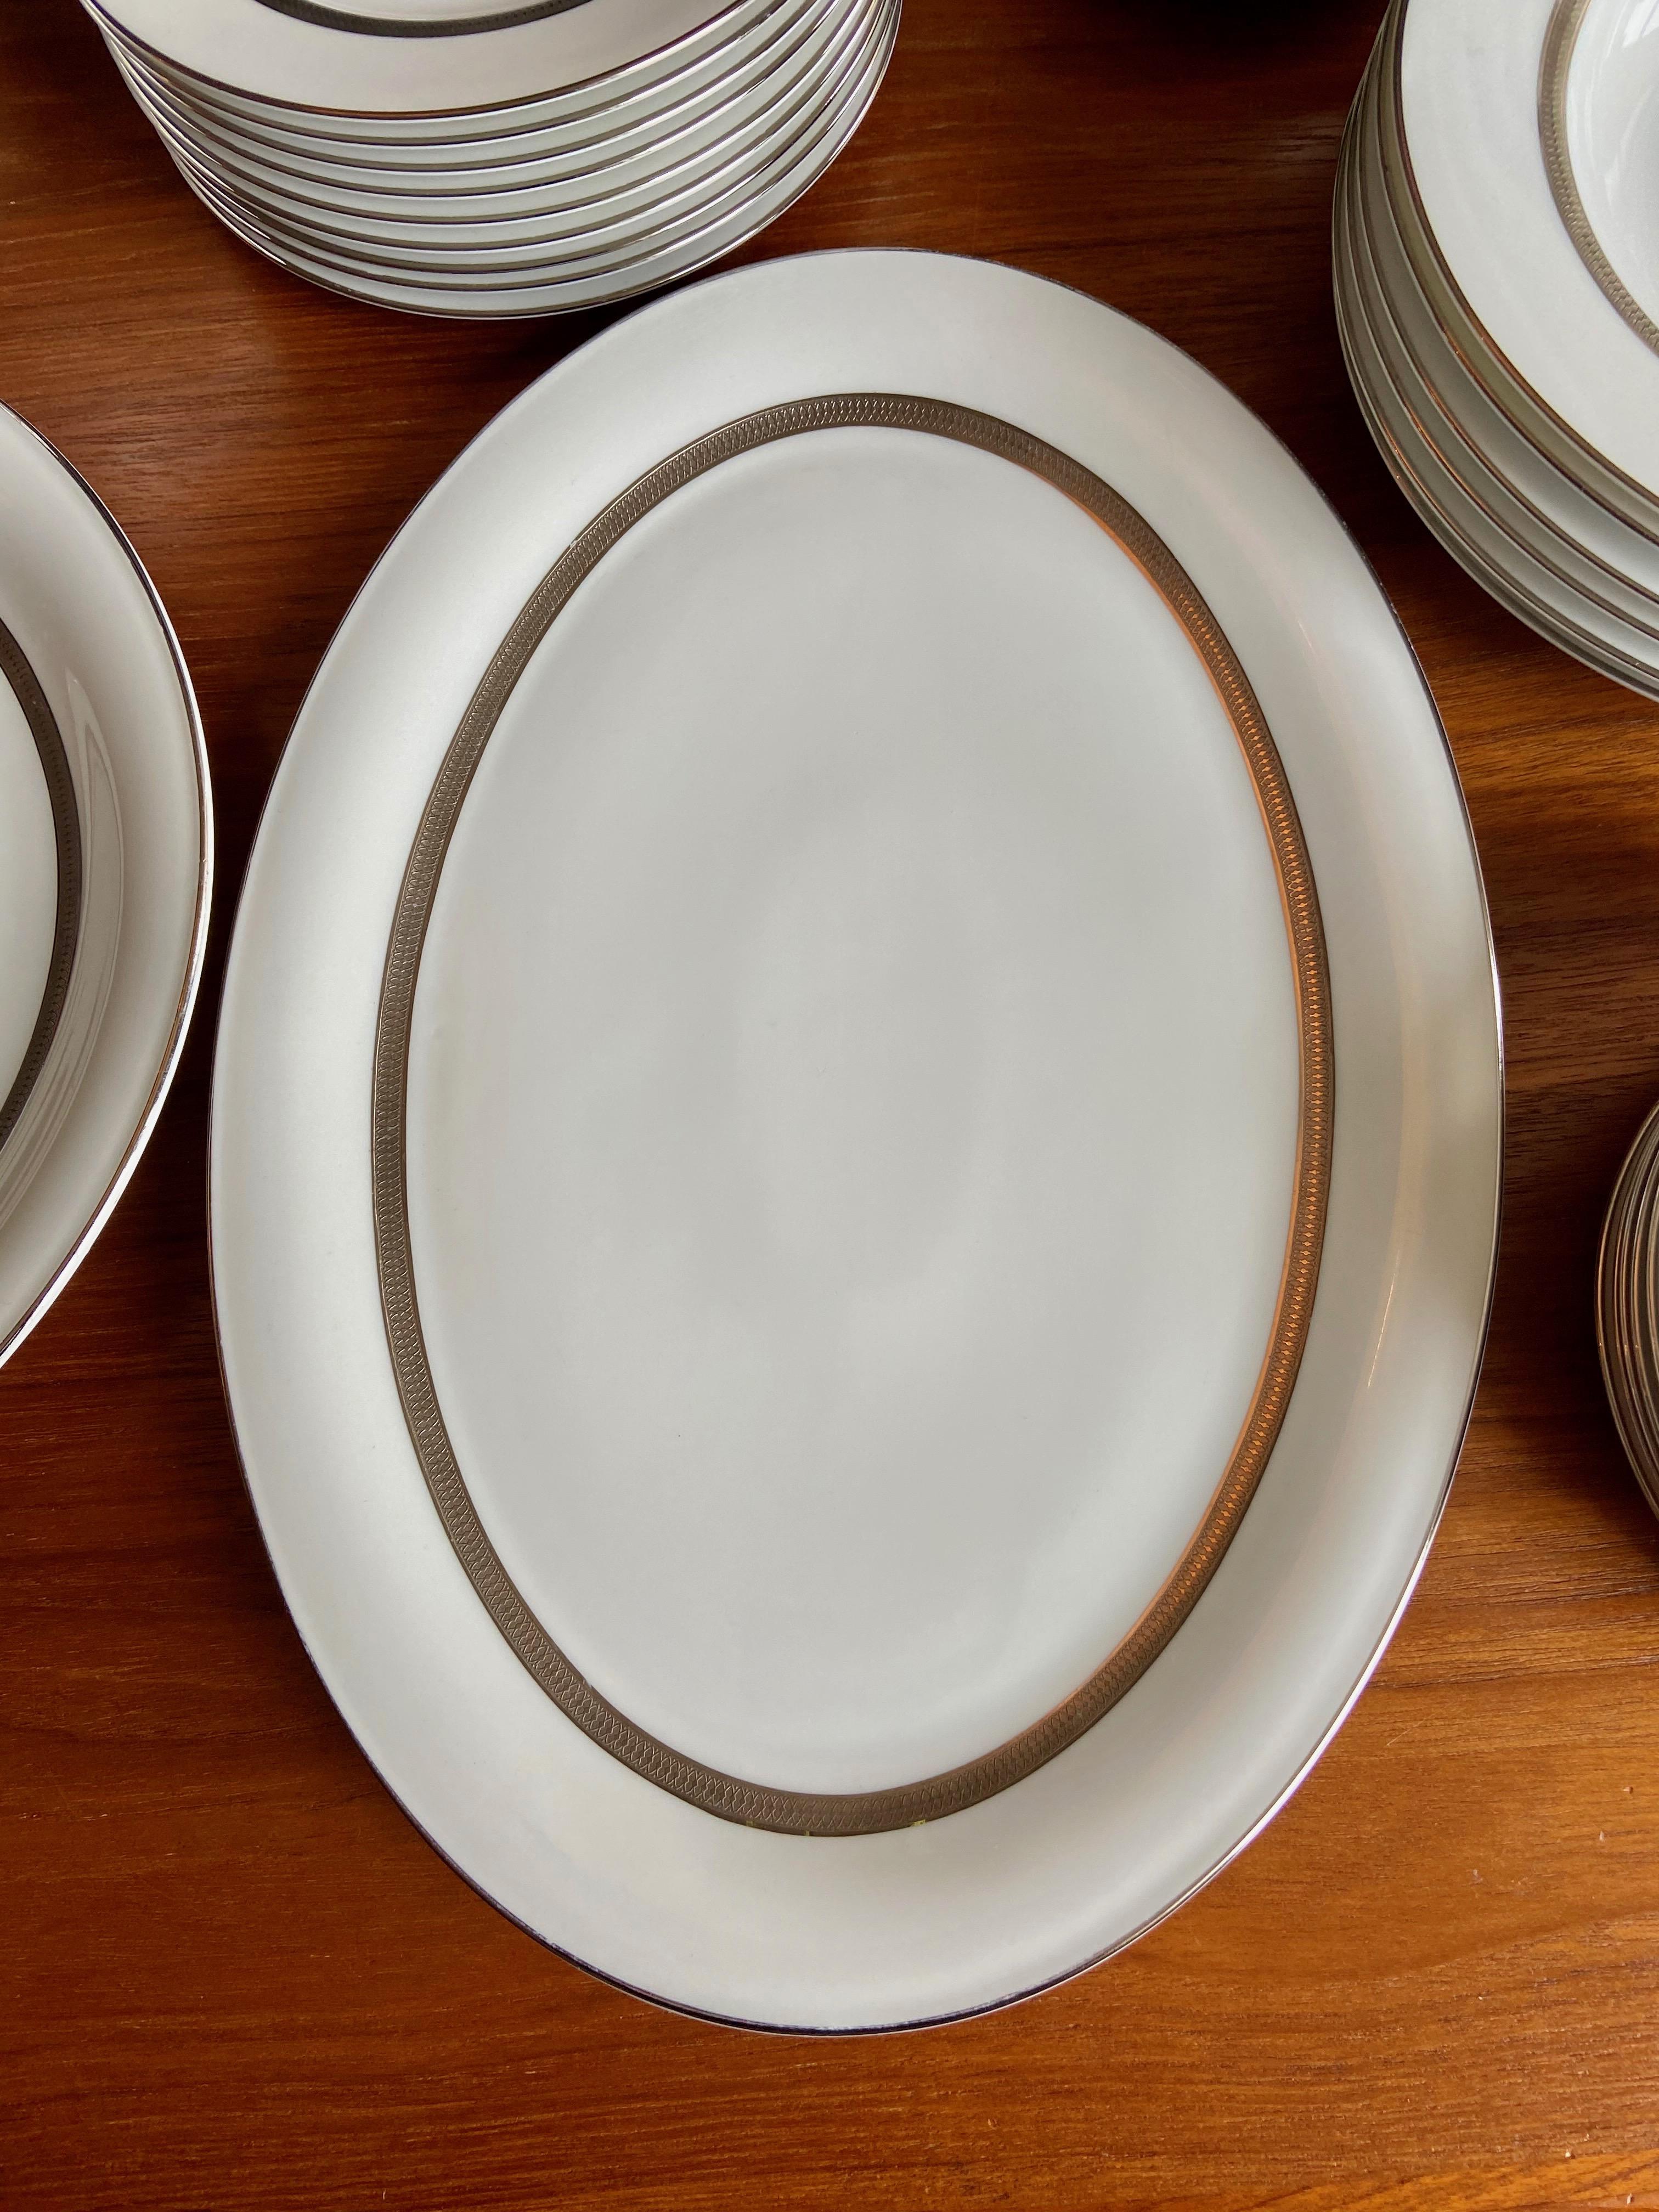 Beautiful classical dining service for six people by the German bran Tirschenreuth. This brand used to be part of the famous manufacturer Hutschenreuther. The service is made of snowy fine white porcelain and is decorated with silver coloured rims.